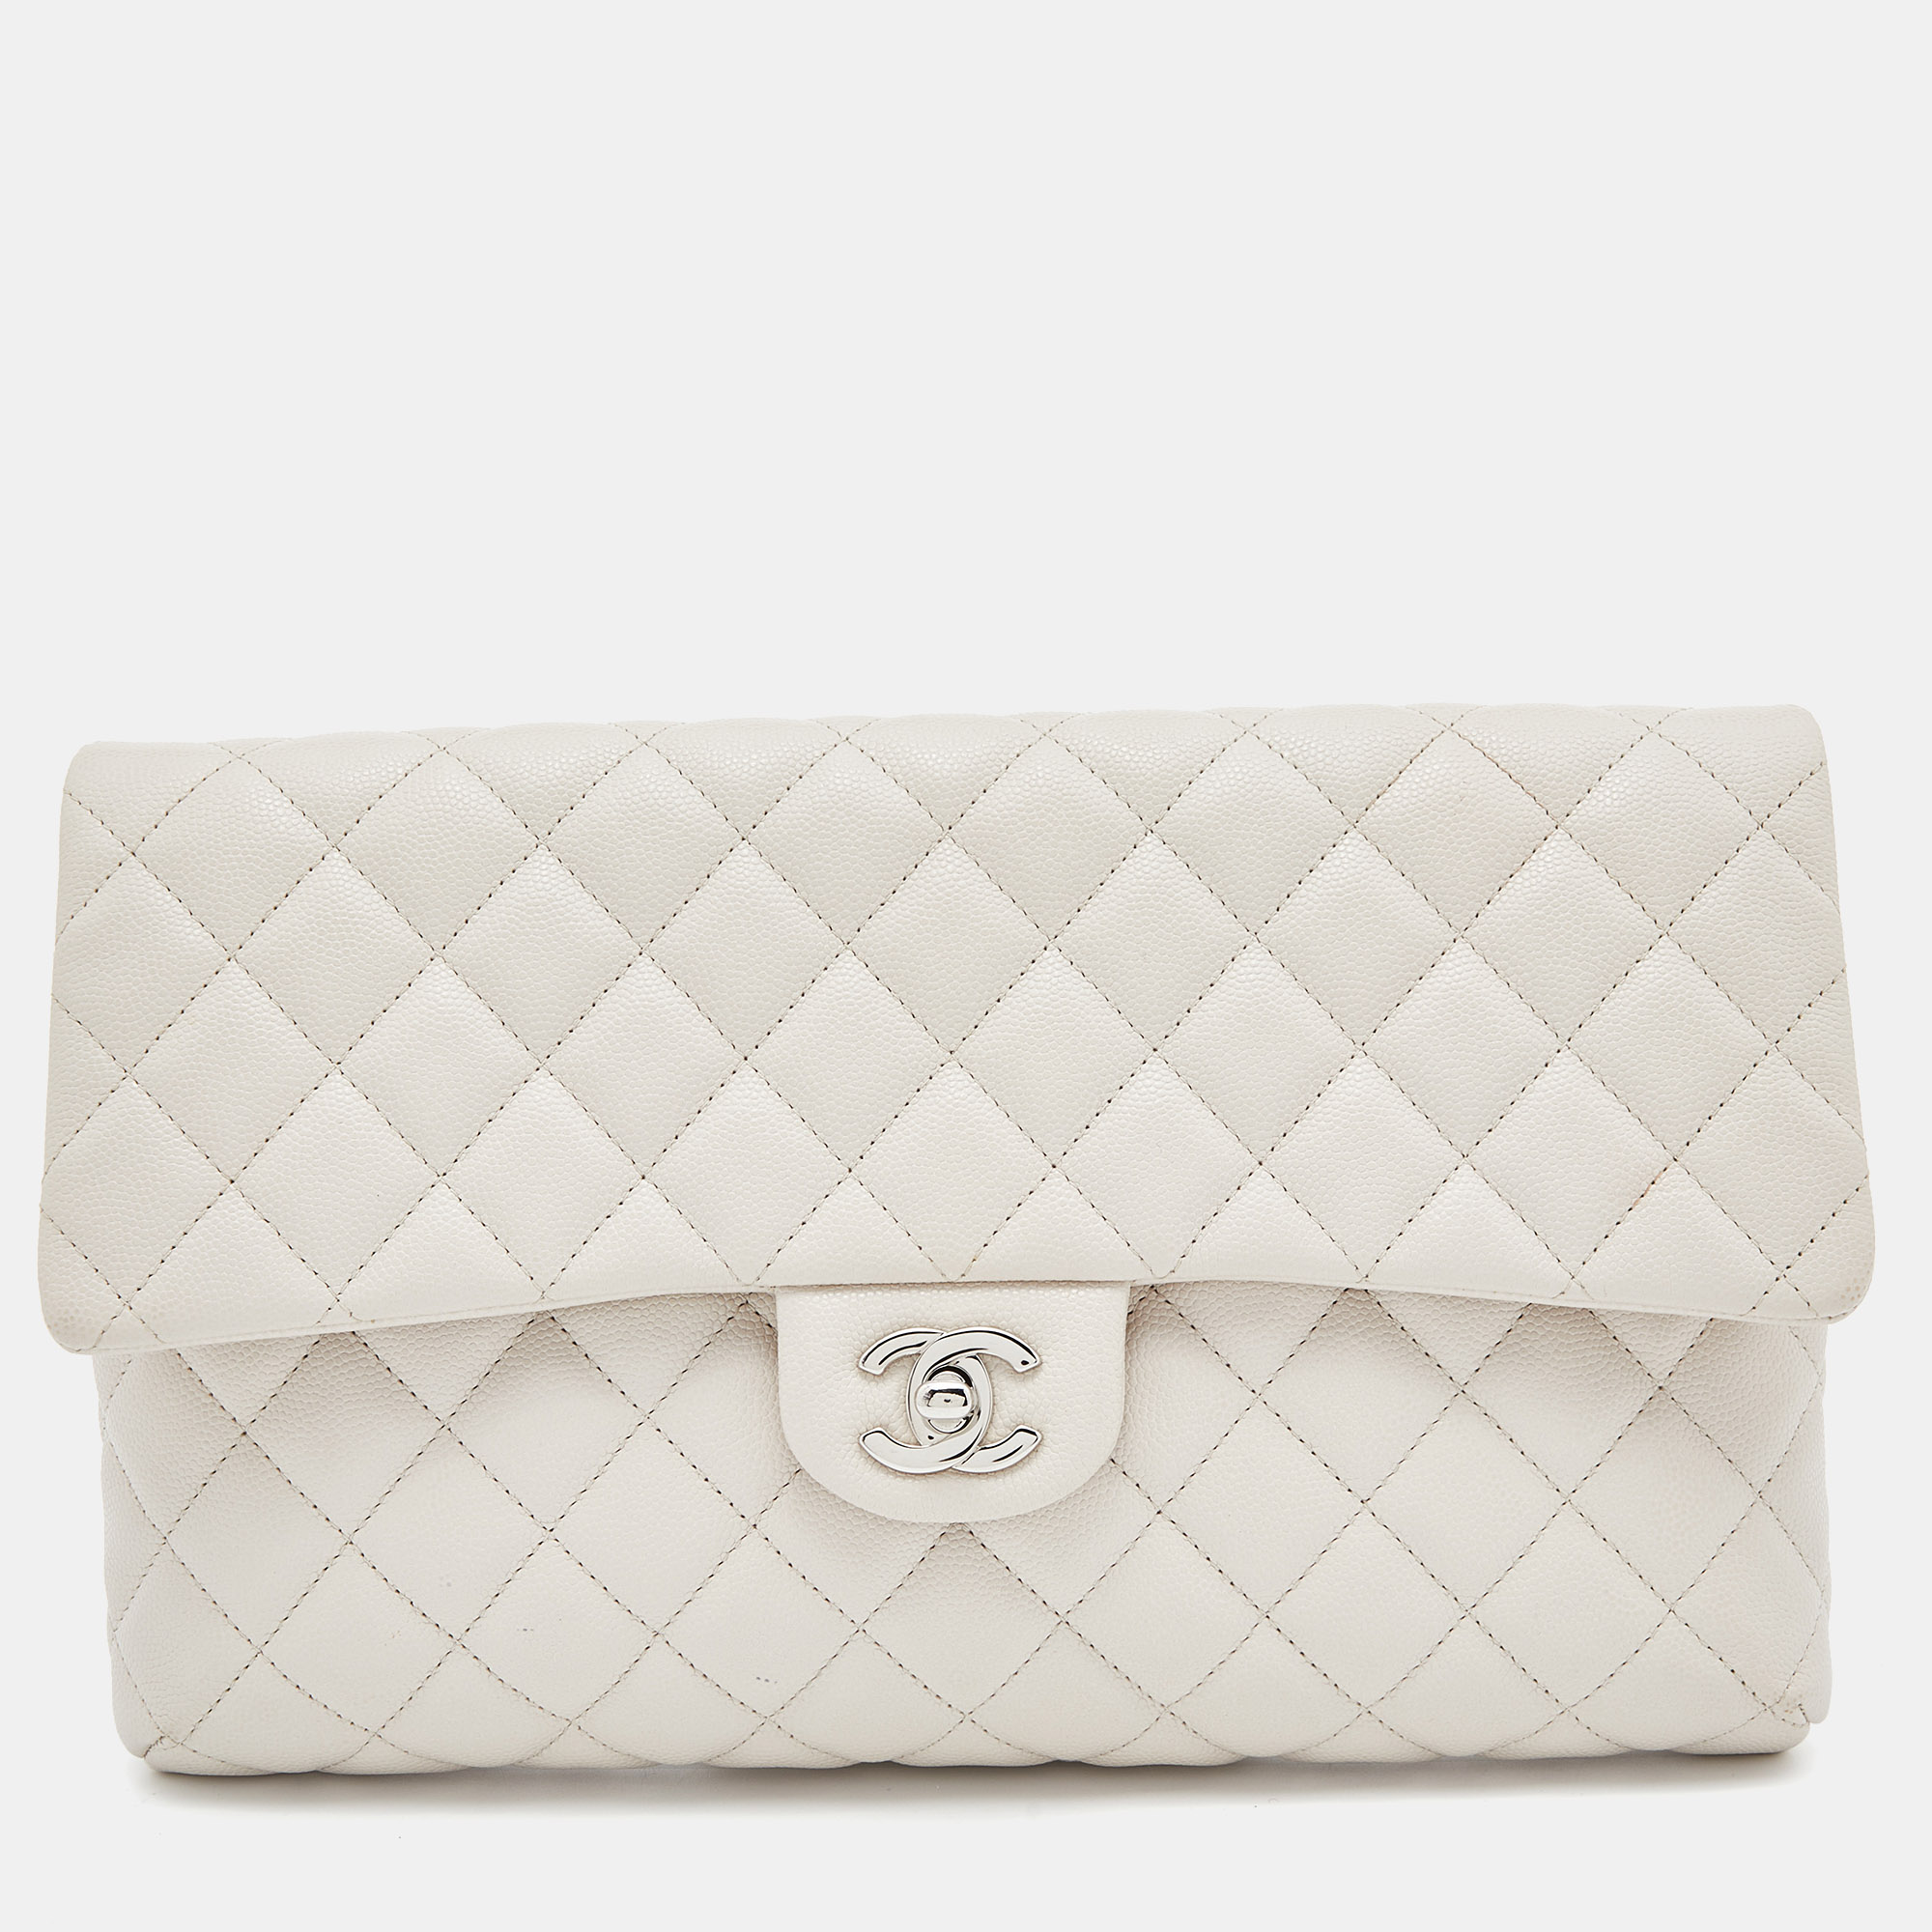 Pre-owned Chanel Off White Quilted Caviar Leather Flap Clutch